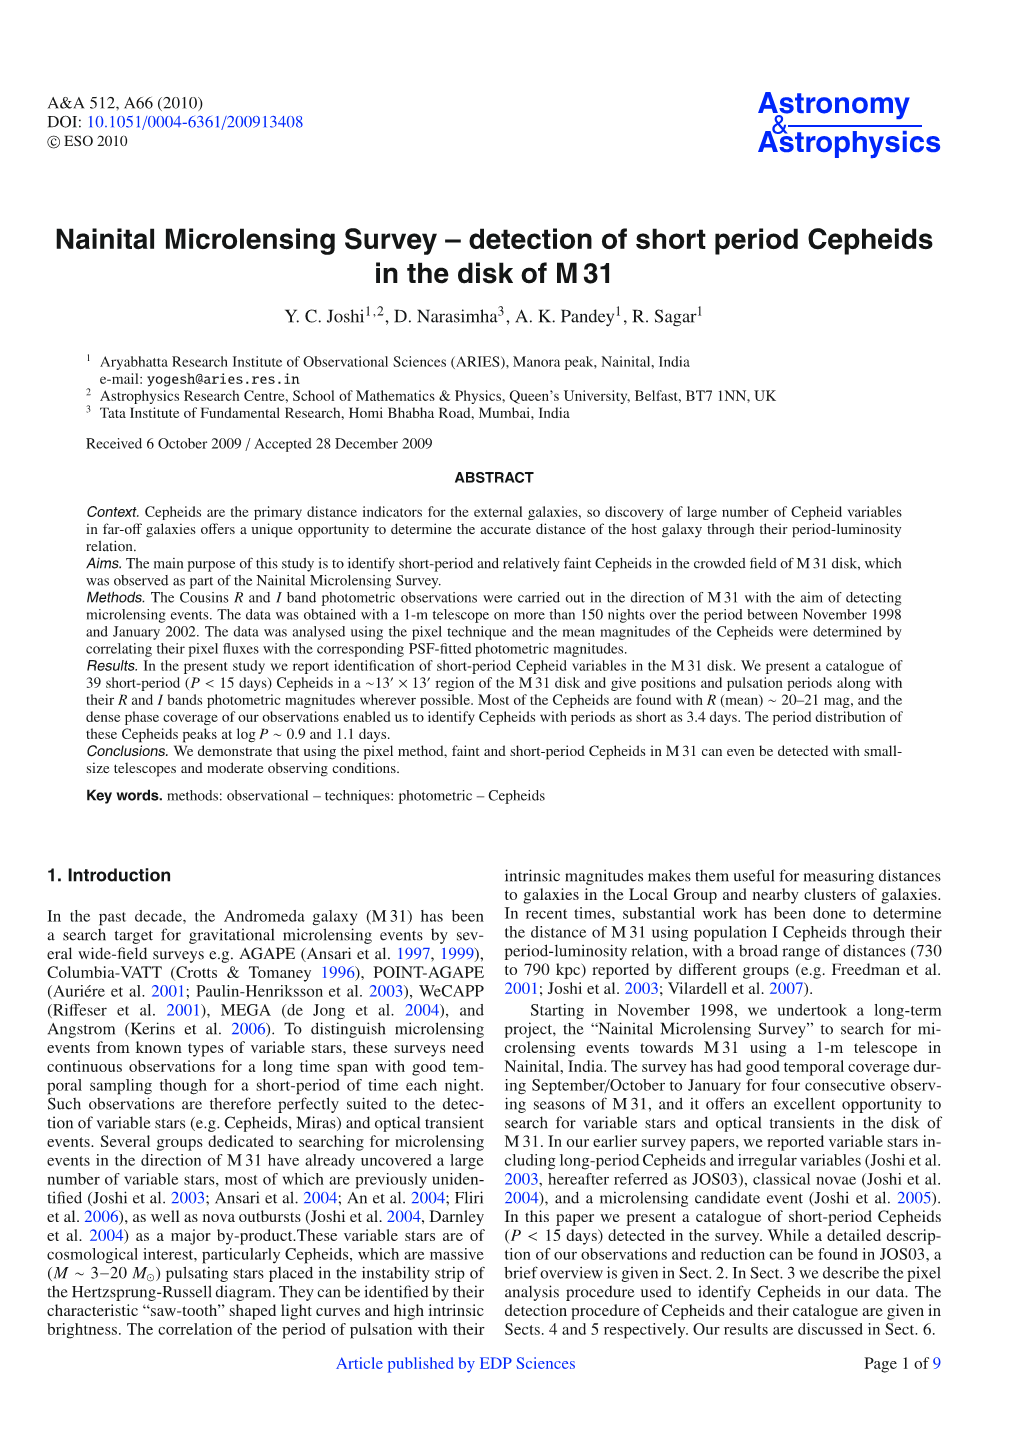 Nainital Microlensing Survey – Detection of Short Period Cepheids in the Disk of M 31